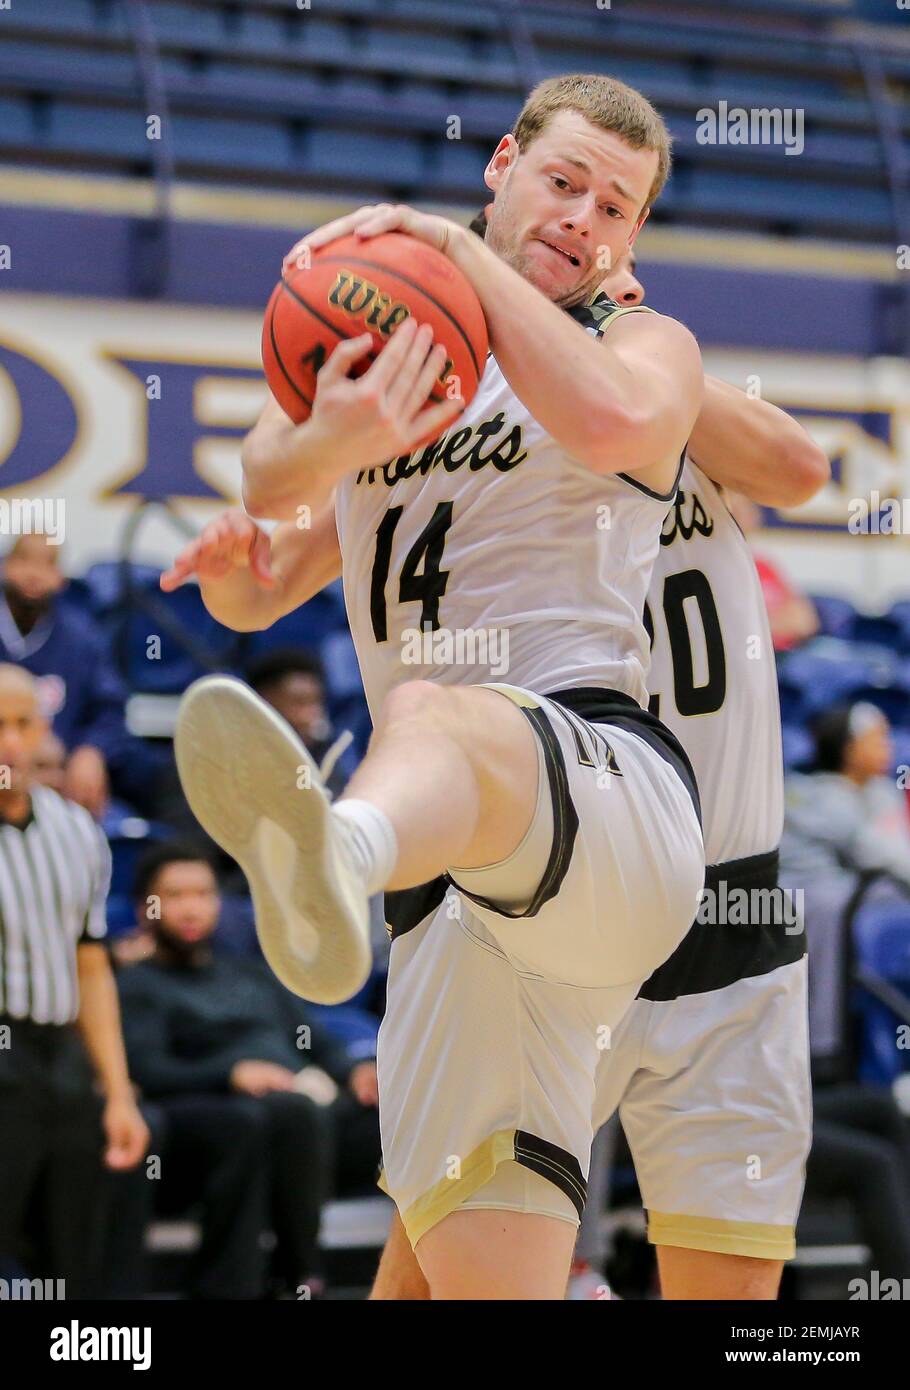 February 2, 2019: Emporia State Forward Duncan Fort (14) grabs a rebound during a basketball game between the Emporia State Hornets and the Central Oklahoma Bronchos at Hamilton Field House in Edmond, OK. Emporia State defeated Central Oklahoma 100-95. Gray Siegel/(Photo by Gray Siegel/CSM/Sipa USA) Stock Photo